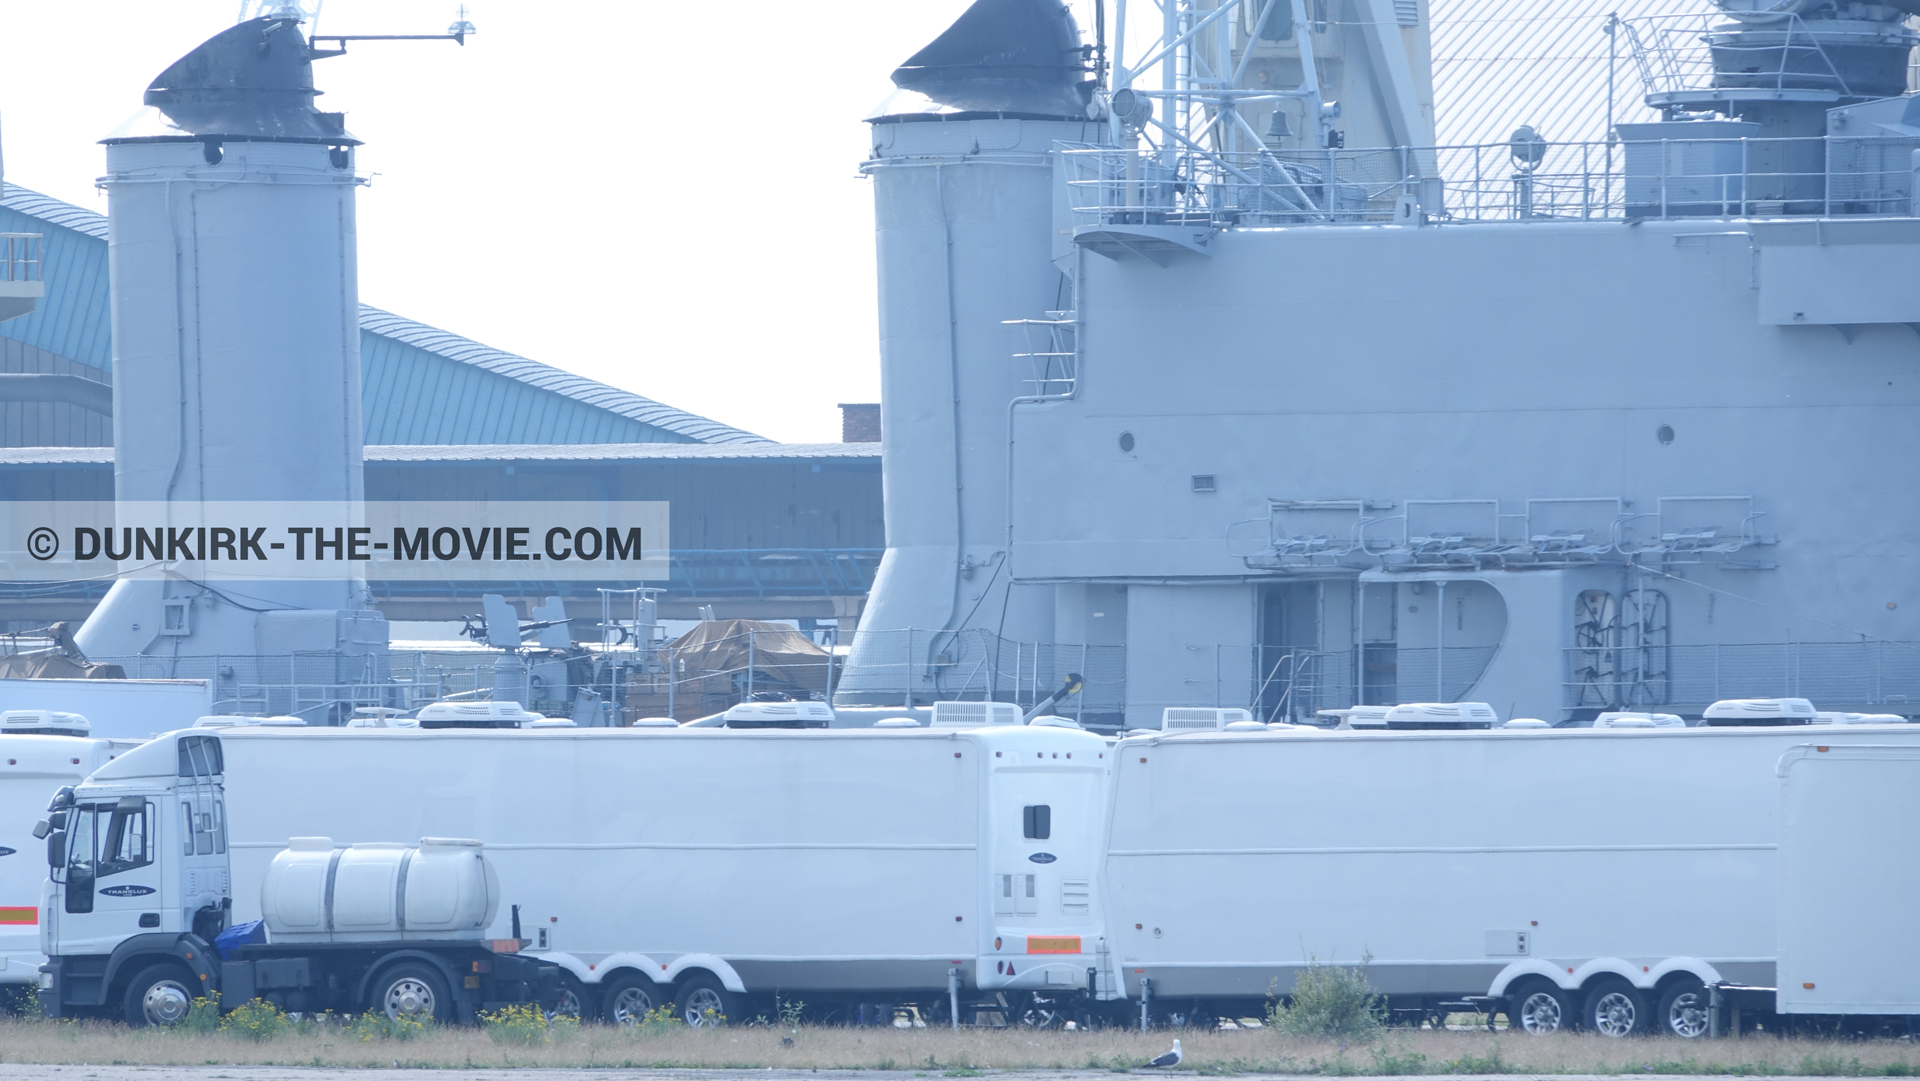 Picture with Maillé-Brézé - D36 - D54,  from behind the scene of the Dunkirk movie by Nolan